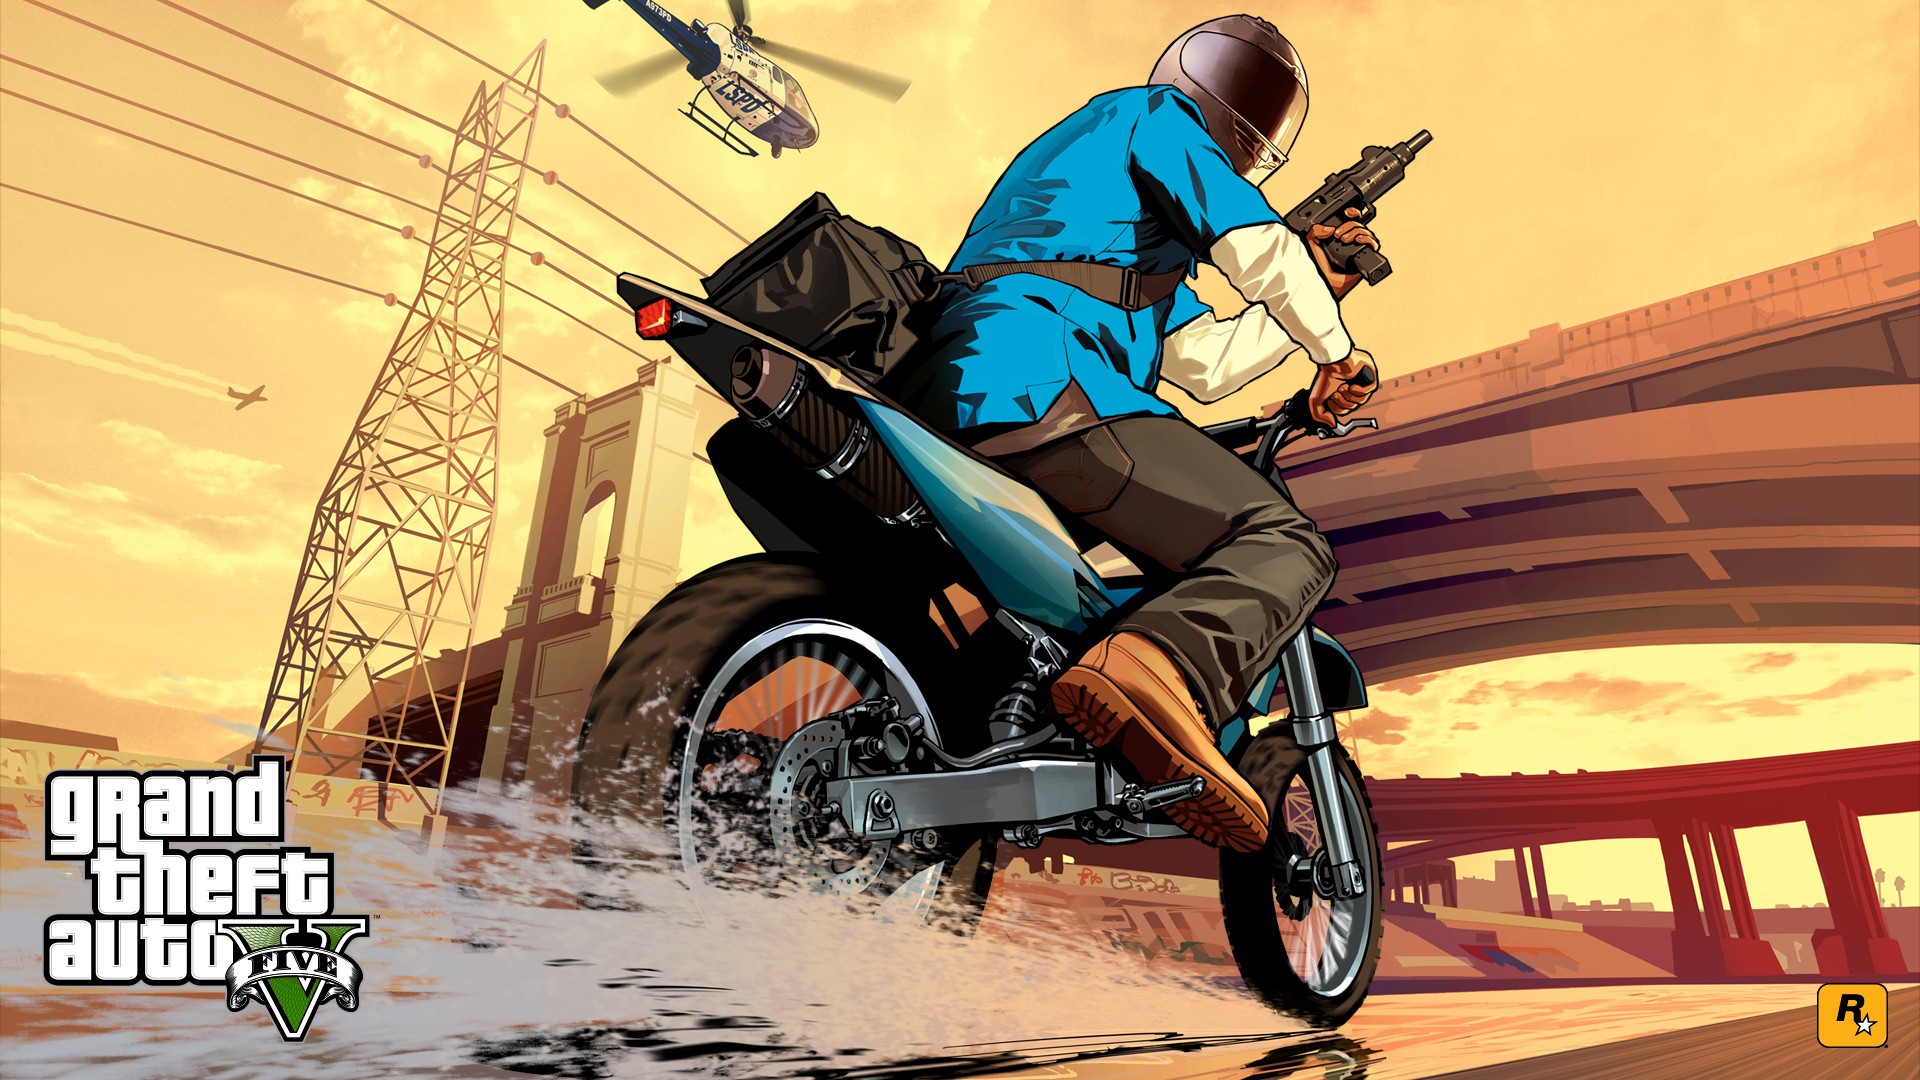 Video Games Video Game Art Motorcycle Vehicle Gangster 1920x1080